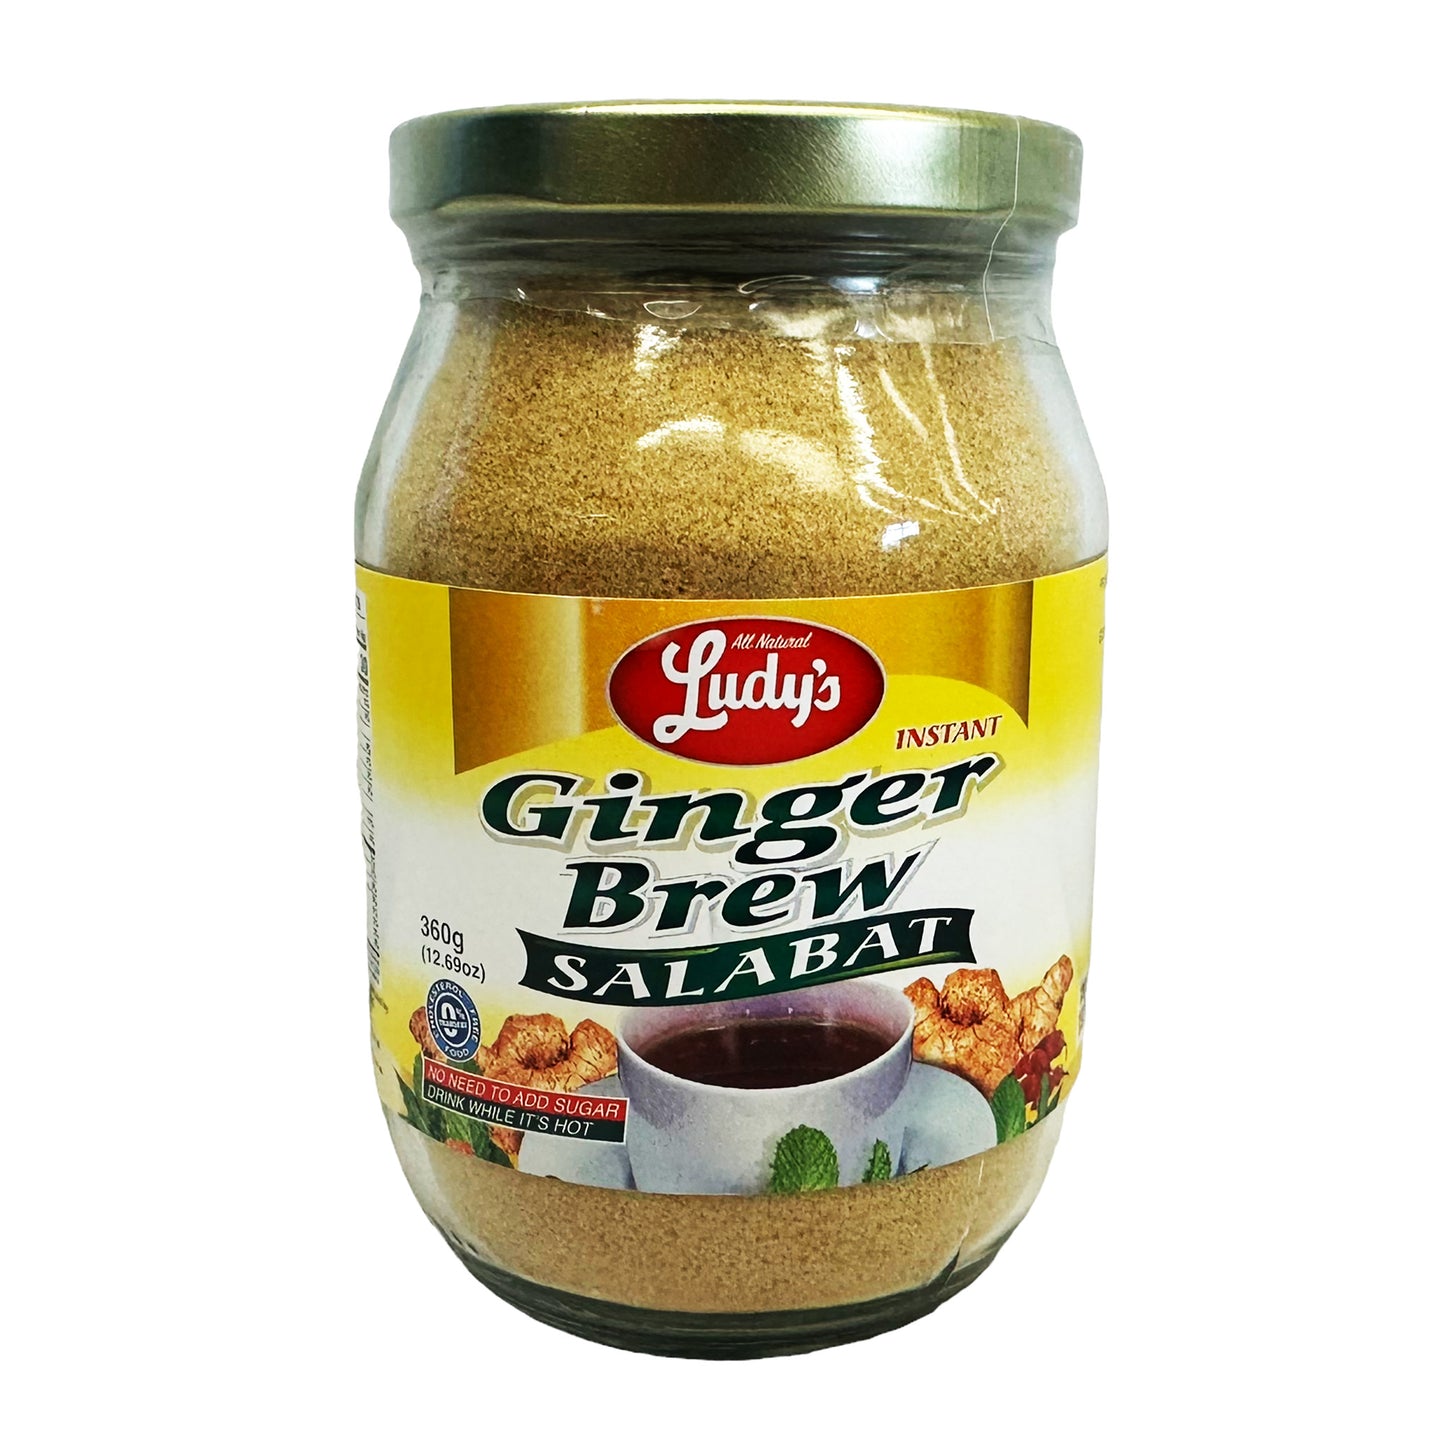 Front graphic image of Ludy's Instant Ginger Brew Salabat 12.69oz